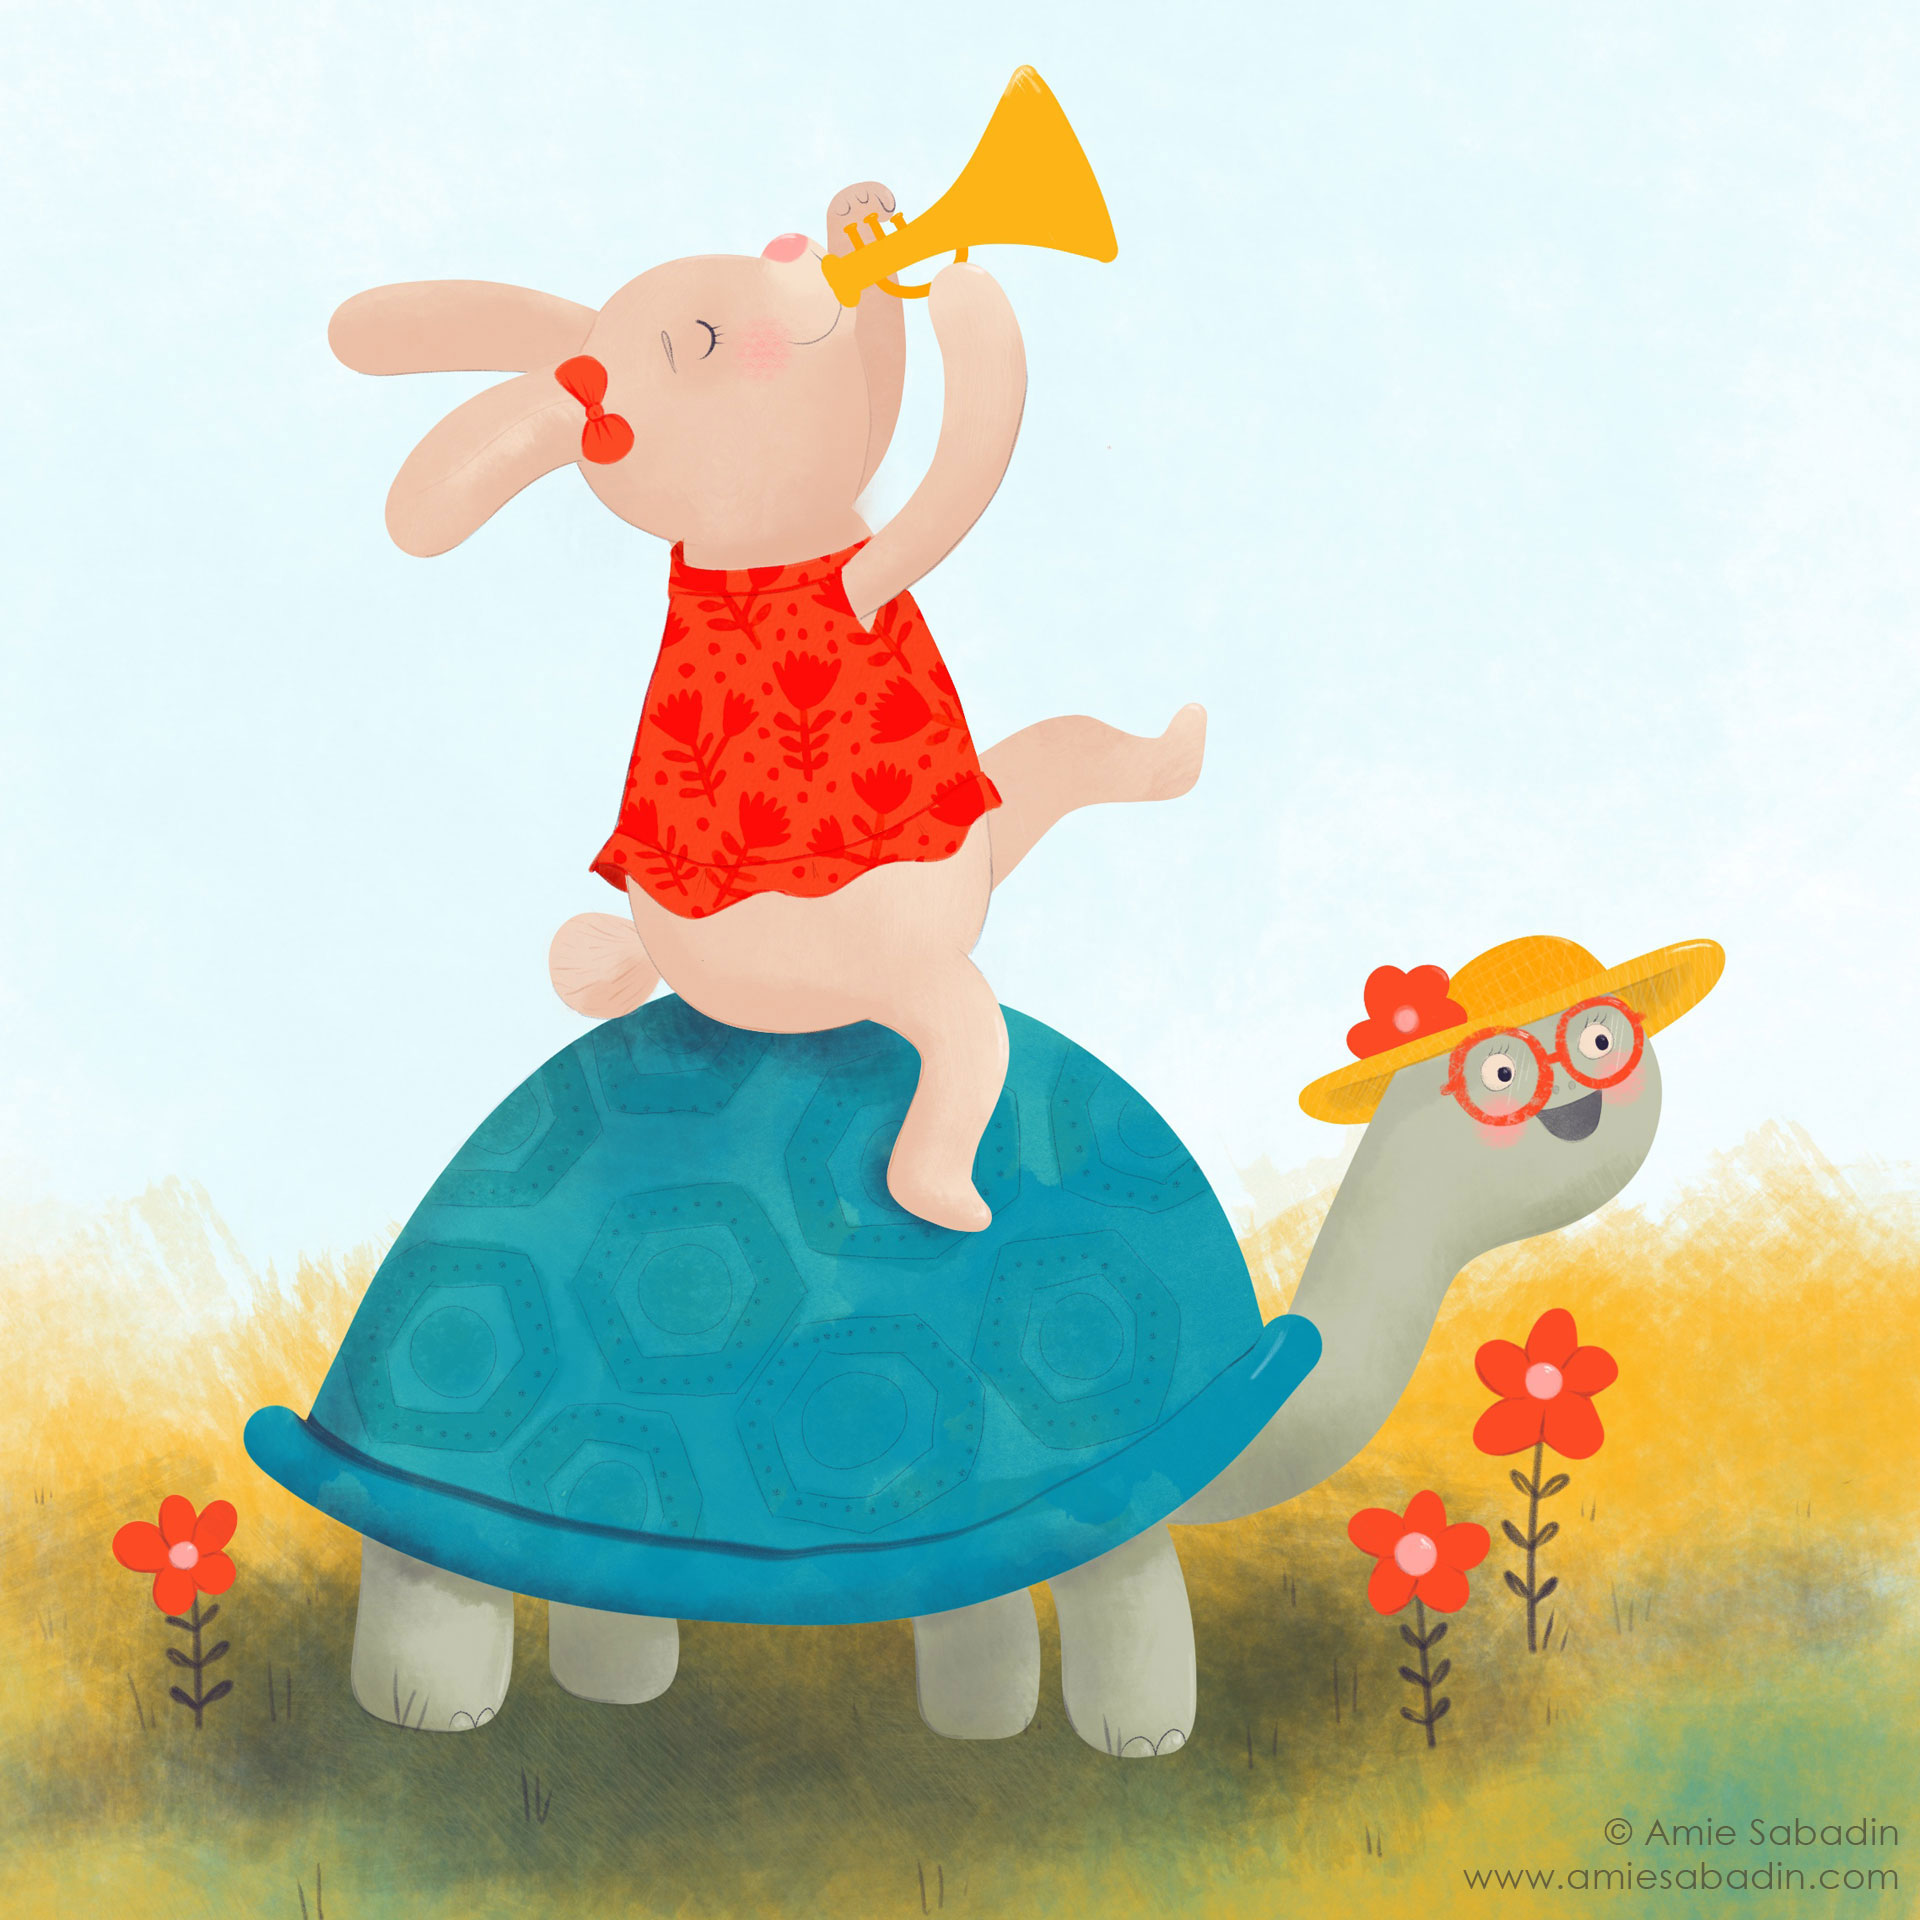 The Rabbit and the Turtle illustration by Amie Sabadin